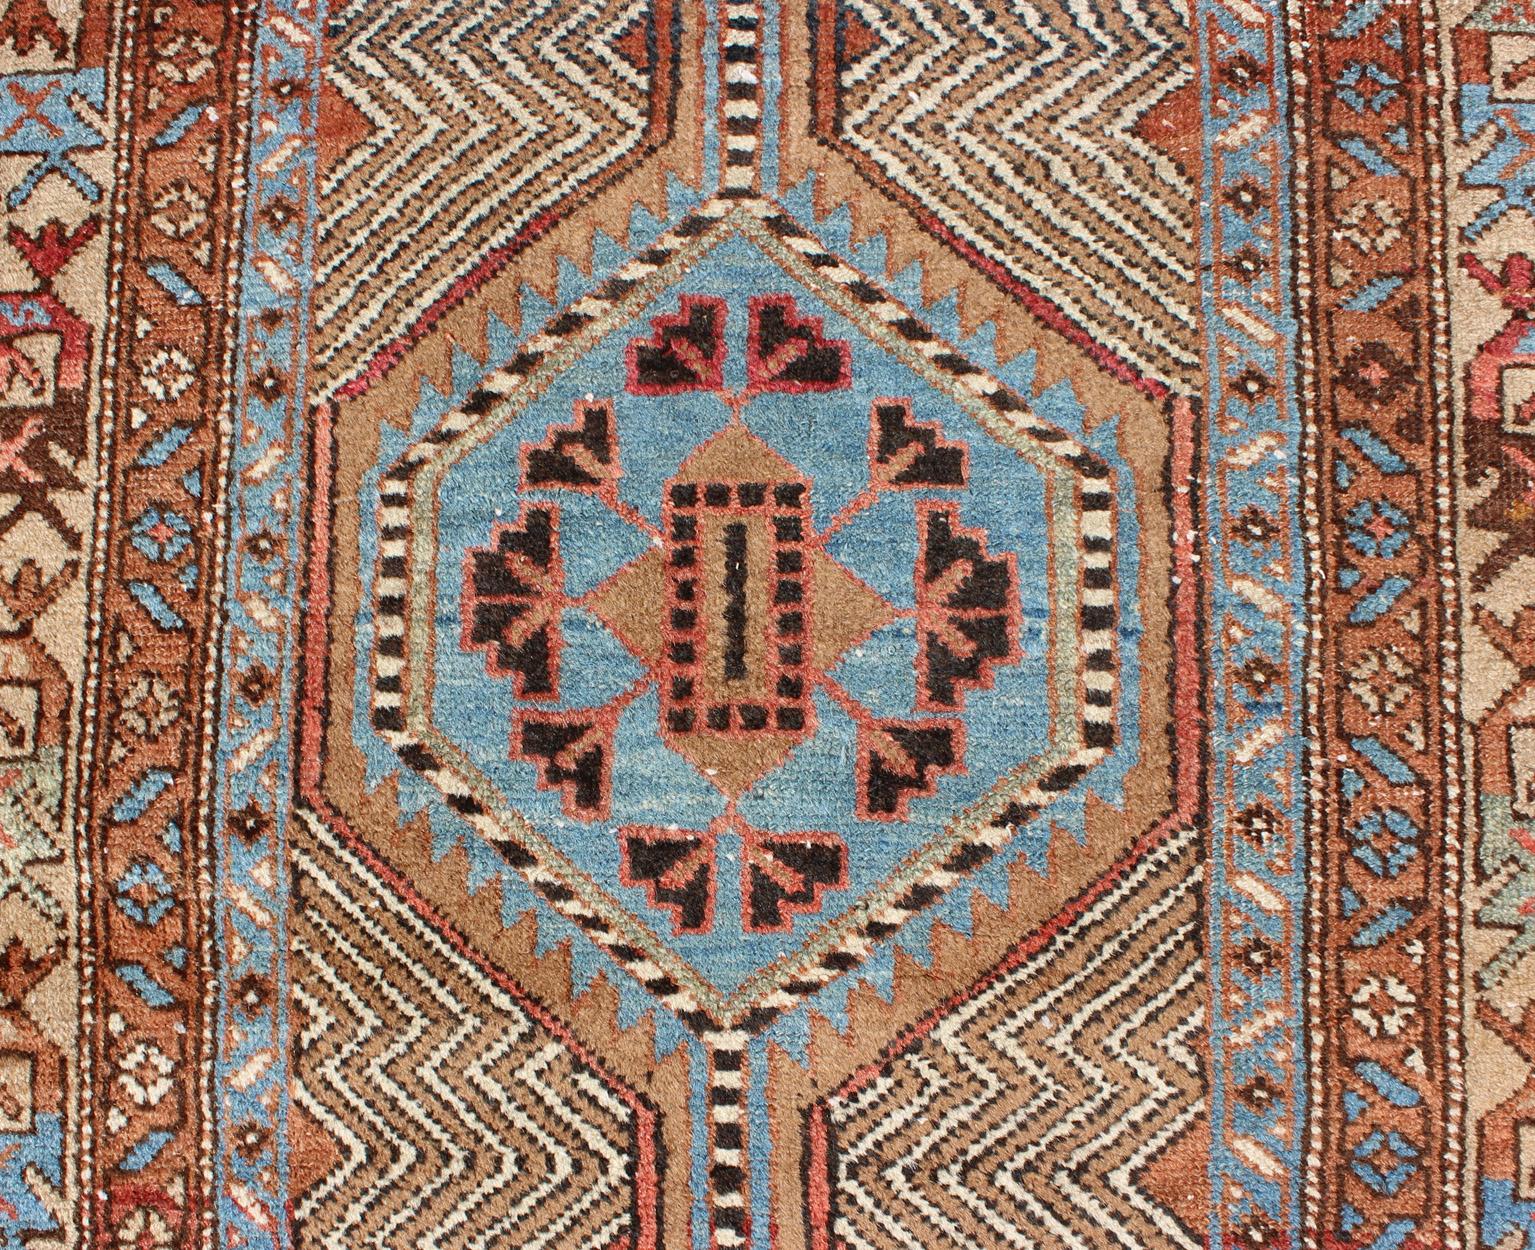 Wool Colorful Antique Persian Serab Gallery Rug with Unique Geometric Design